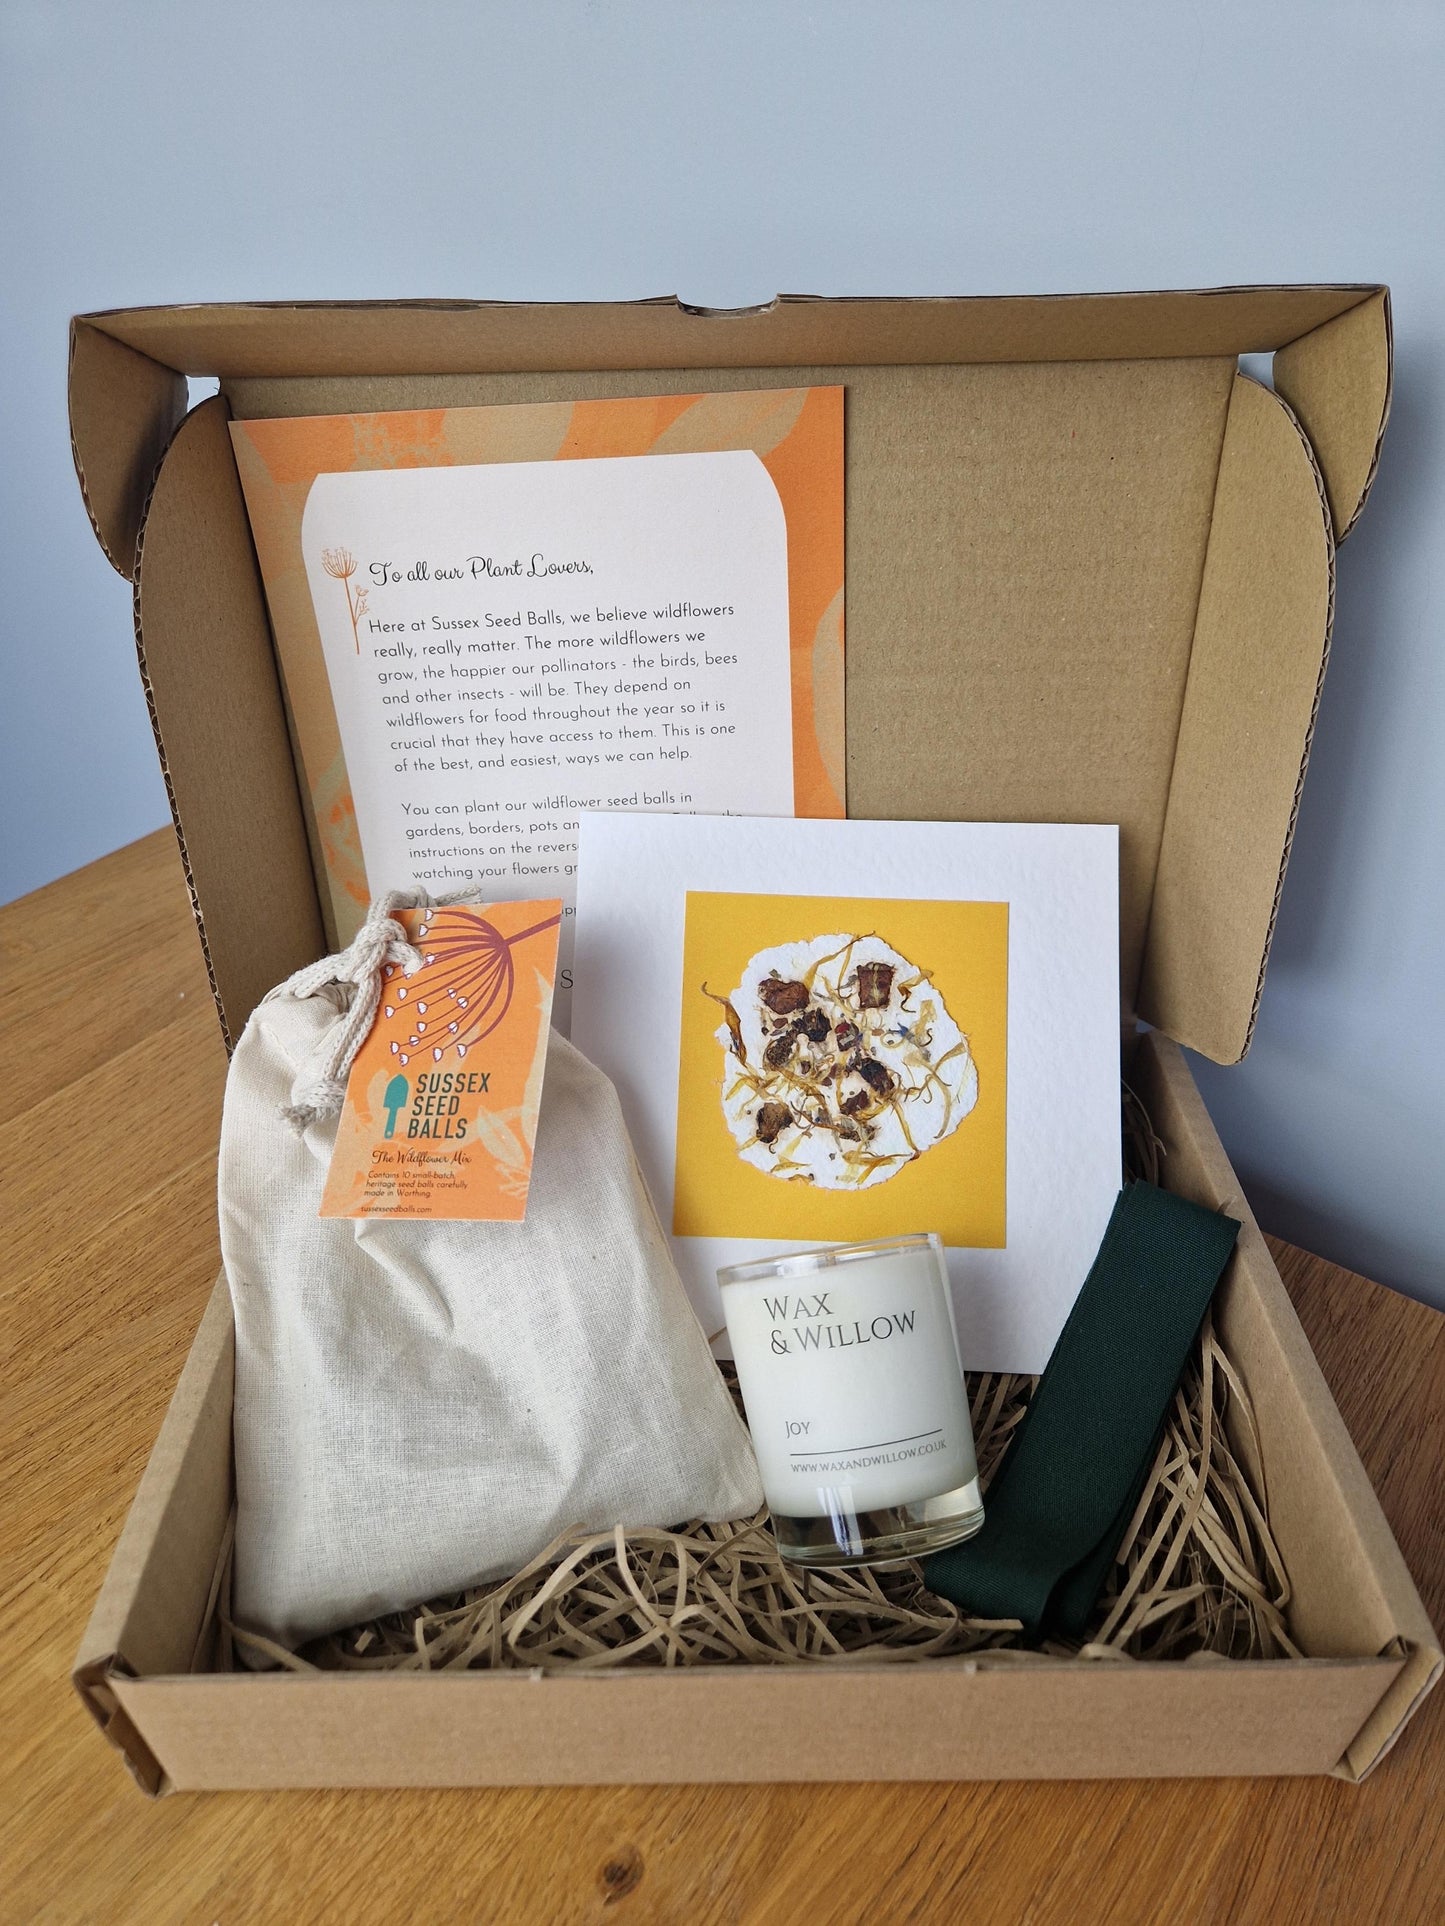 Sussex Seed Balls x Passion for Pulp "Celebration" Gift Box